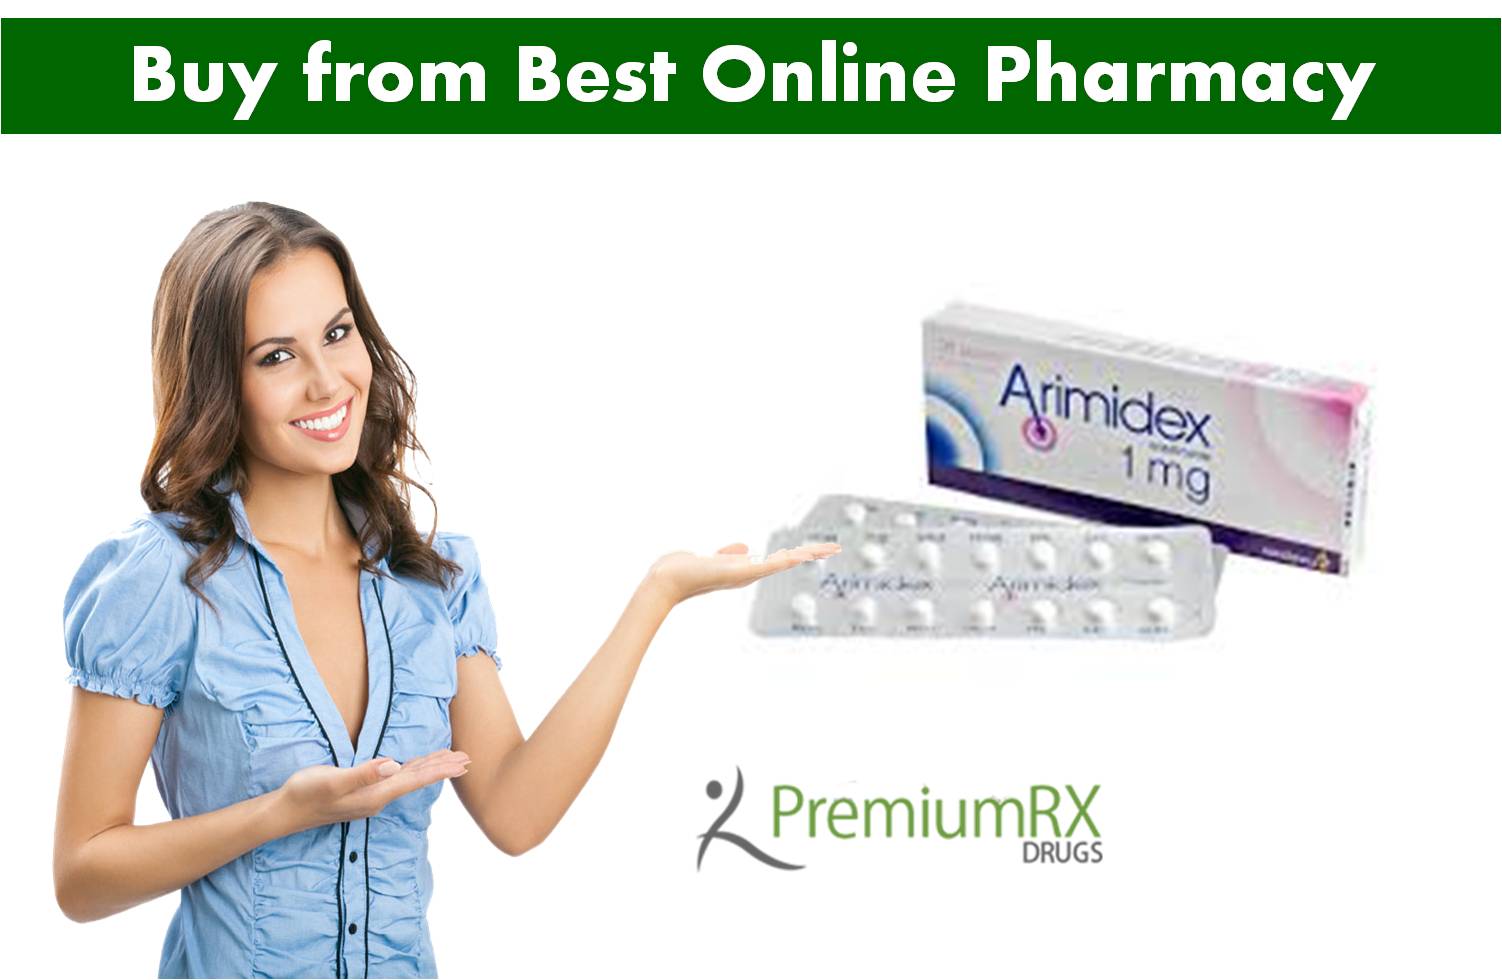 Arimidex 1 mg – A Treatment for Breast Cancer